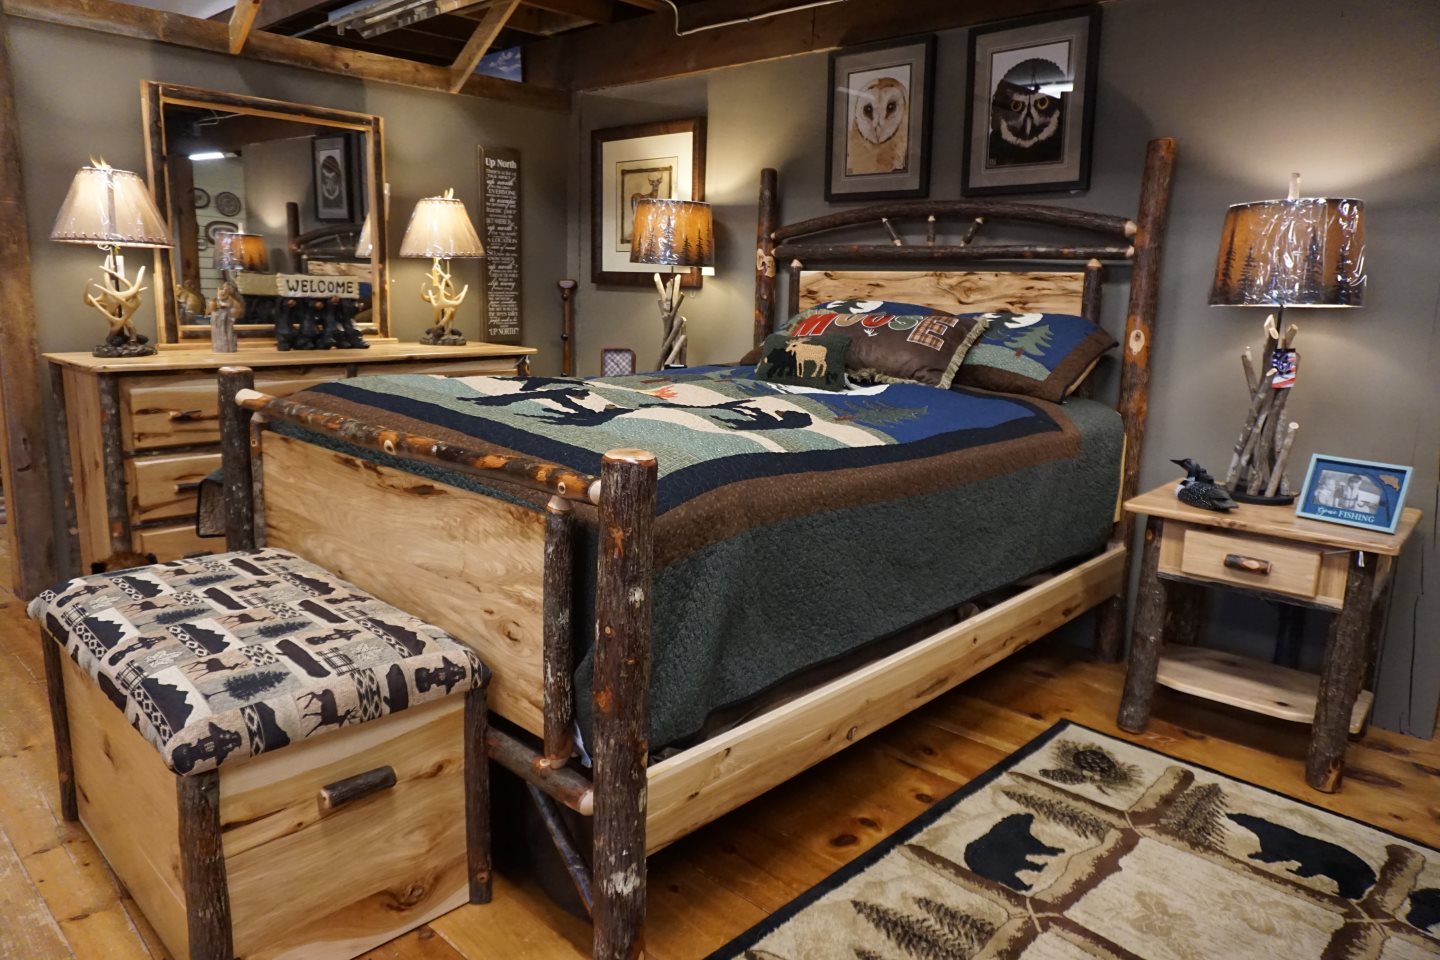 Brage - Amish - Hickory Panel Bed